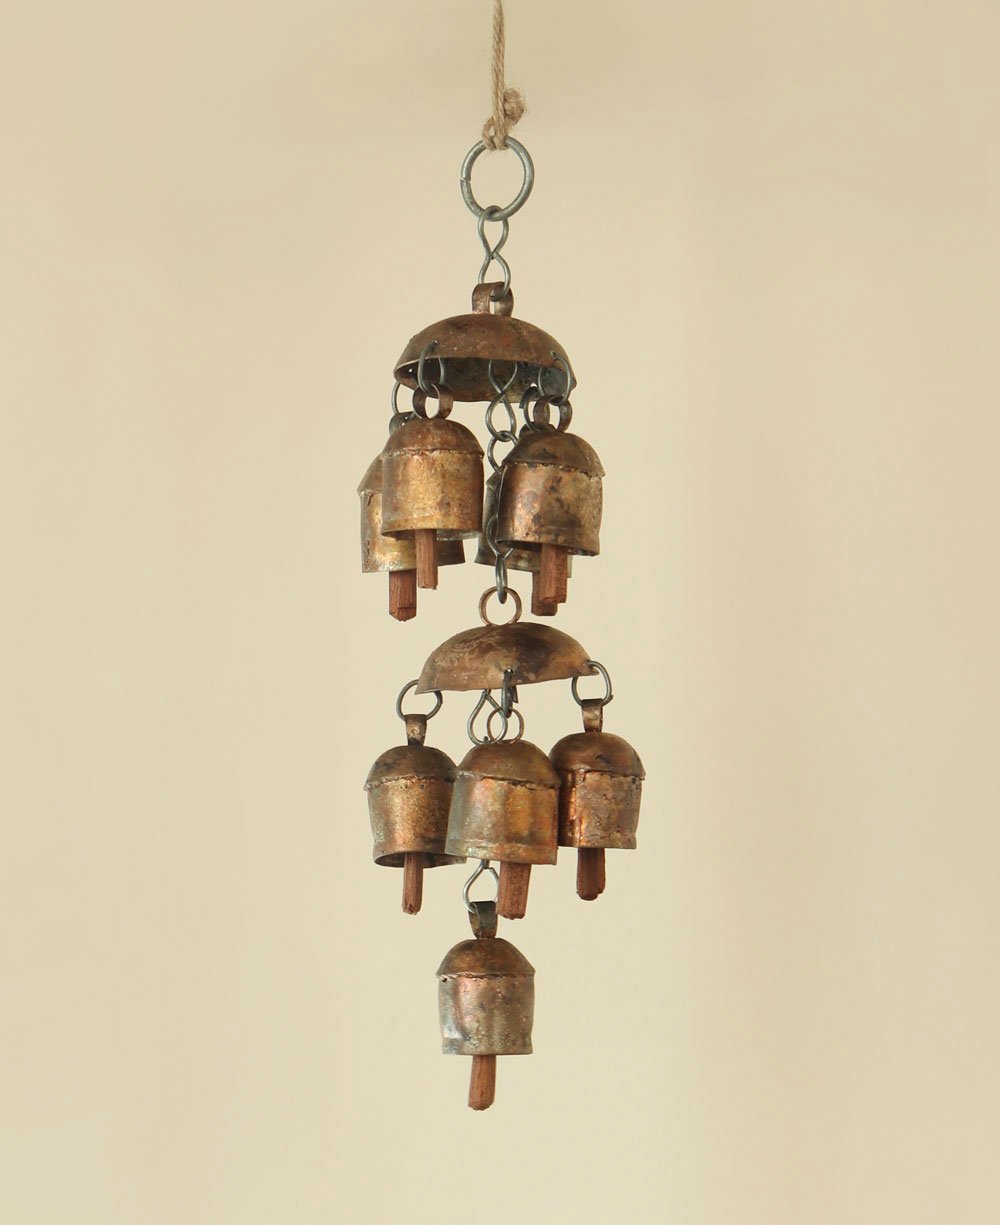 Fairtrade Traditional Double Layered Bell Hanging Chime - Wind Chimes